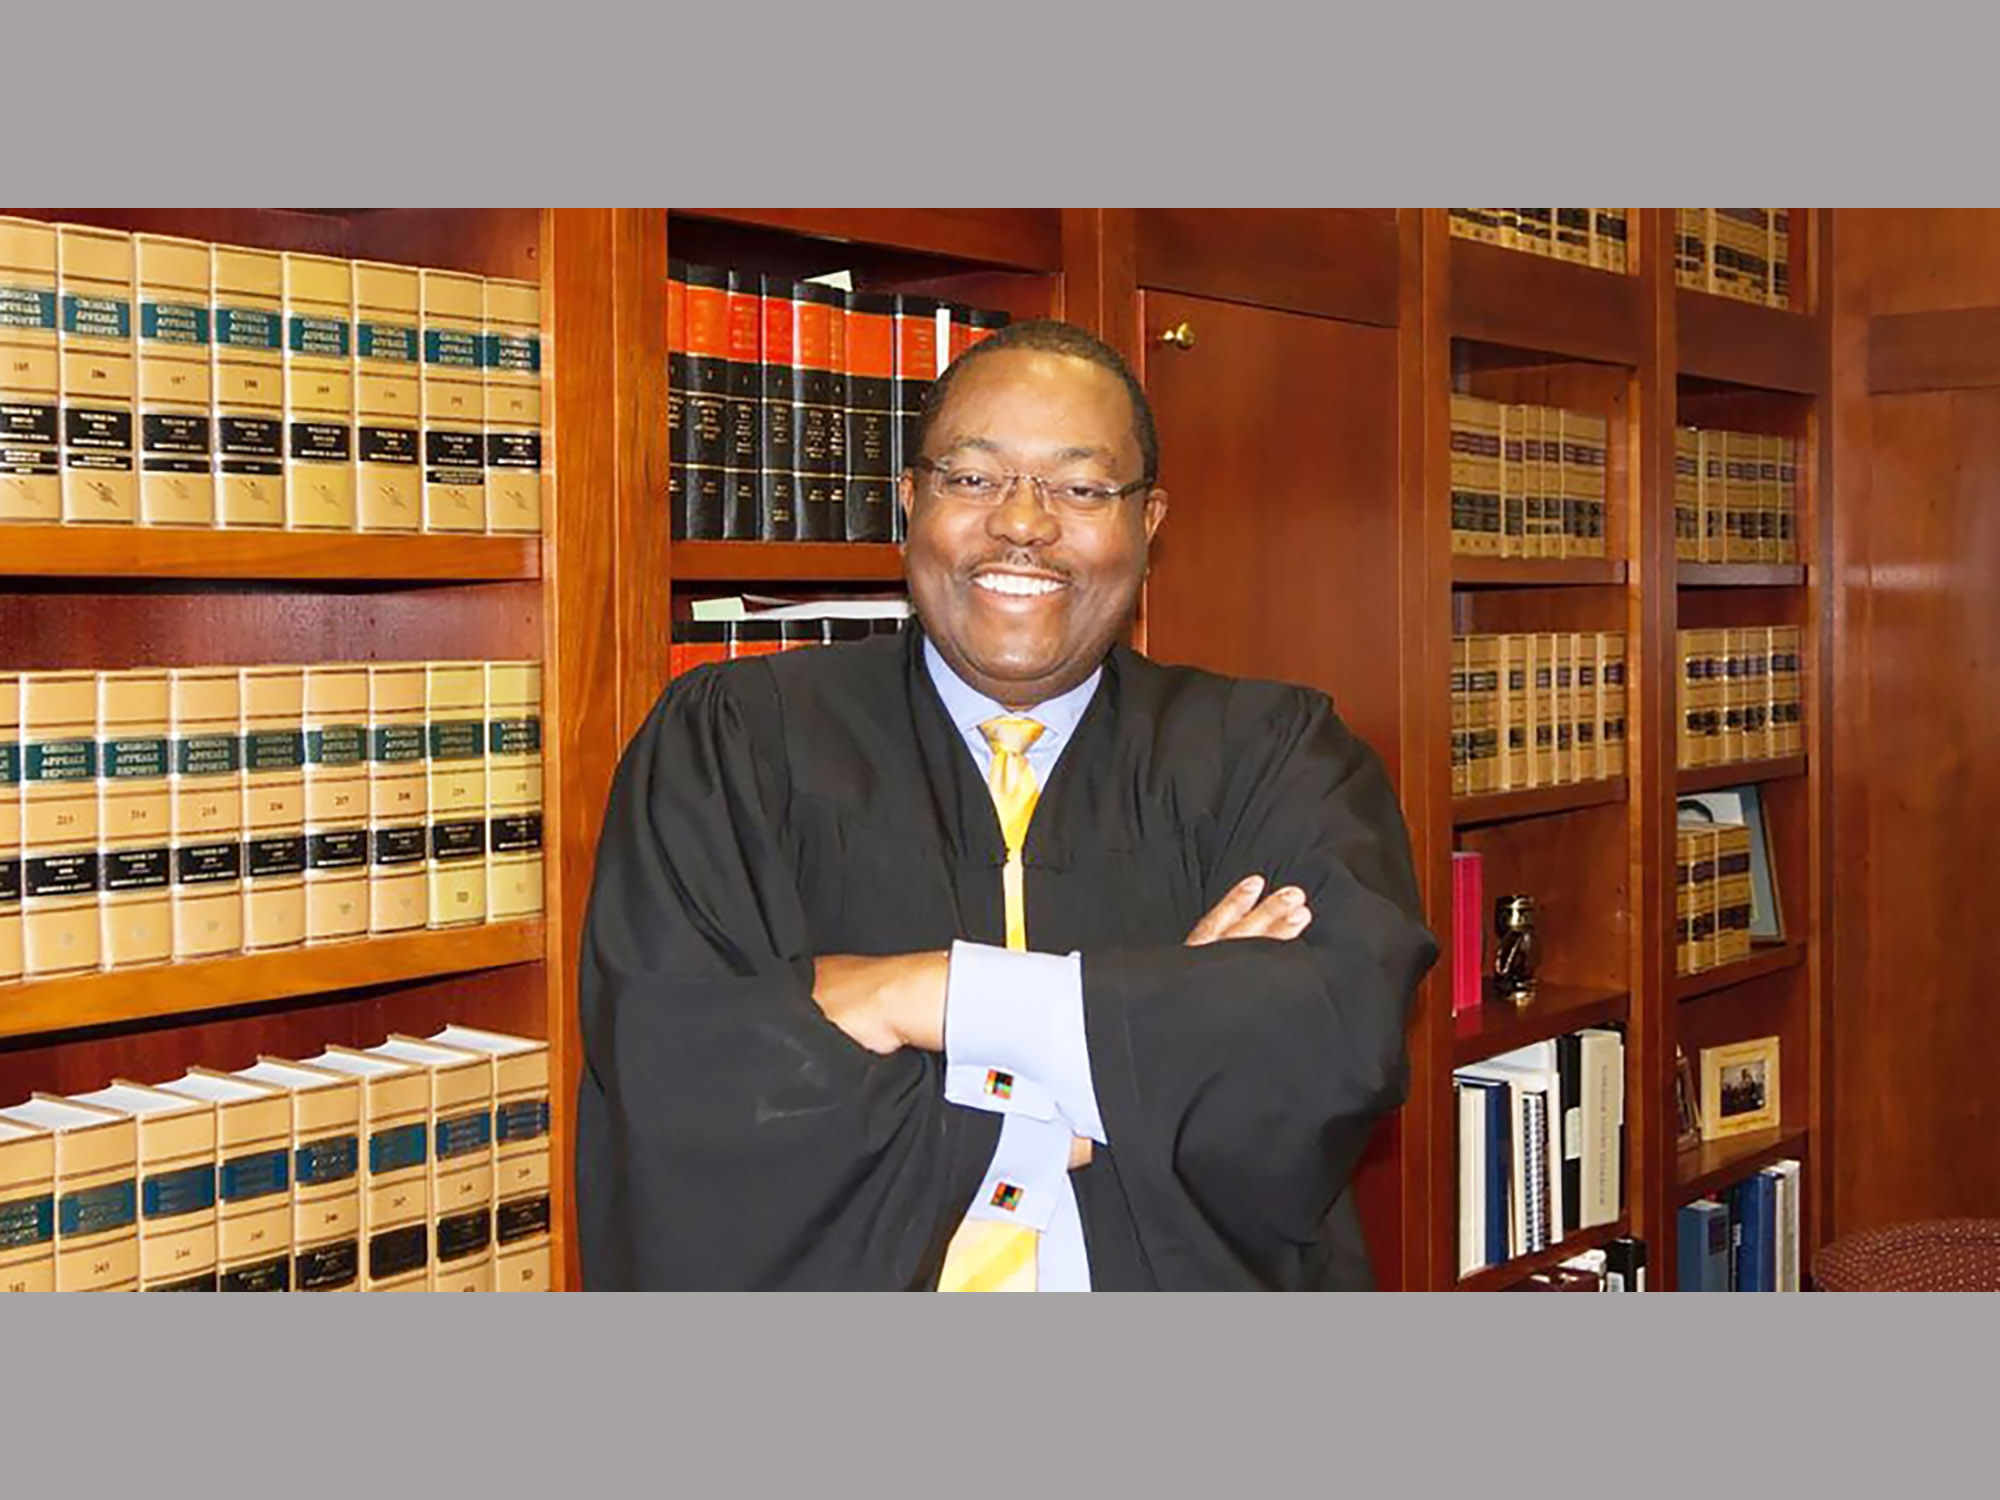 Inaugural Judge Horace J. Johnson, Jr. Lecture delivered by Yale law scholar